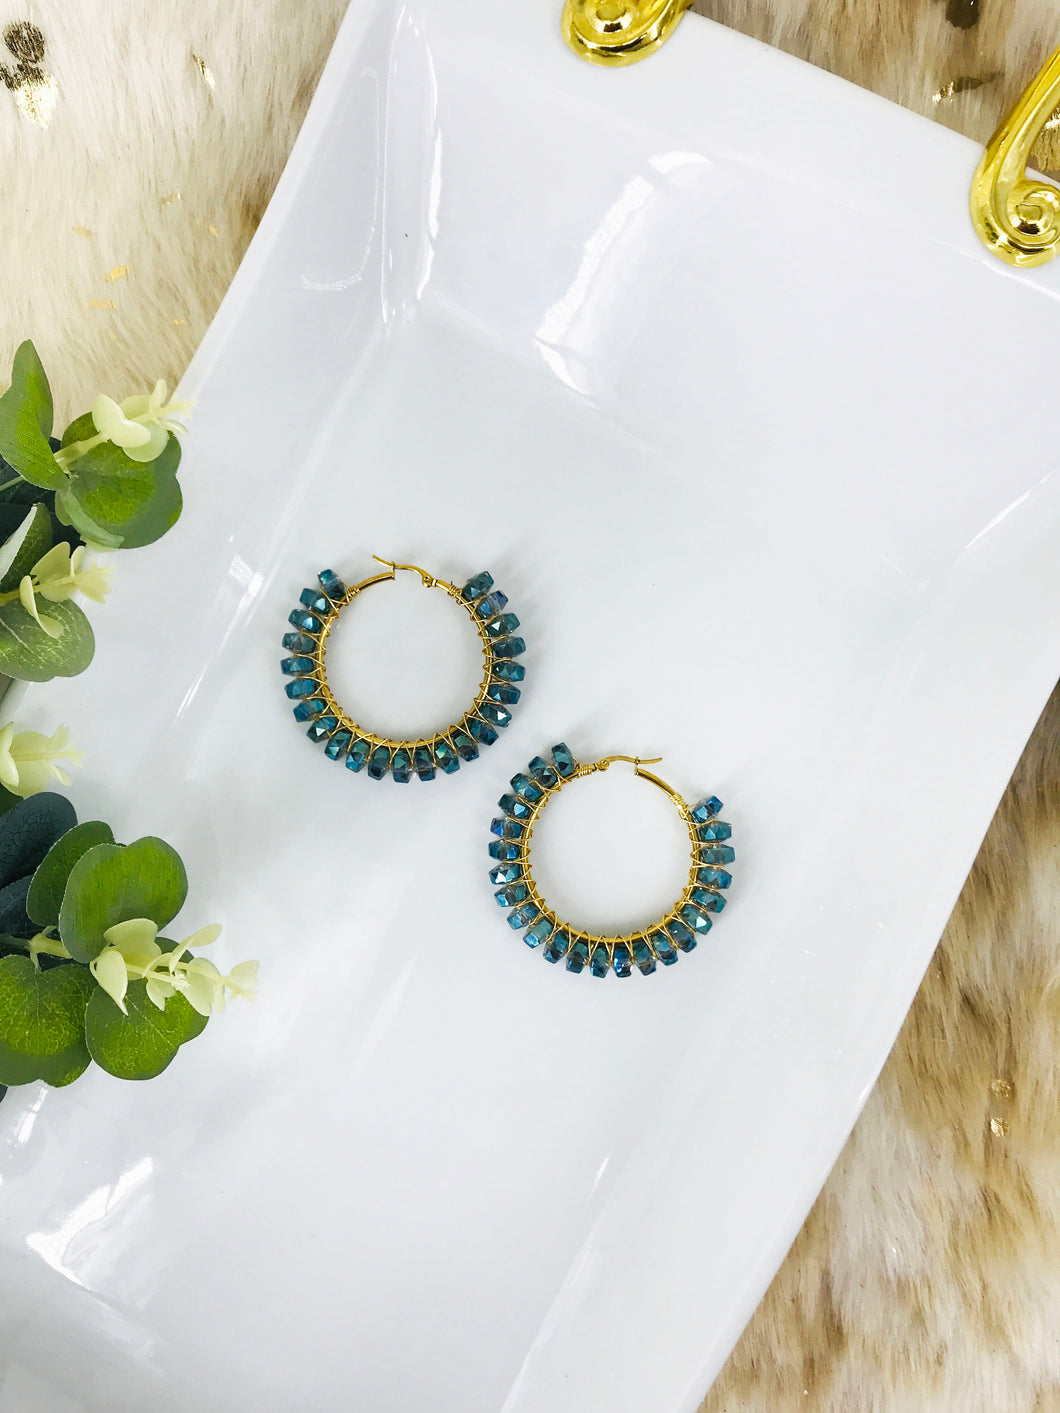 Glass Bead and Stainless Steel Hoop Earrings - E19-2641